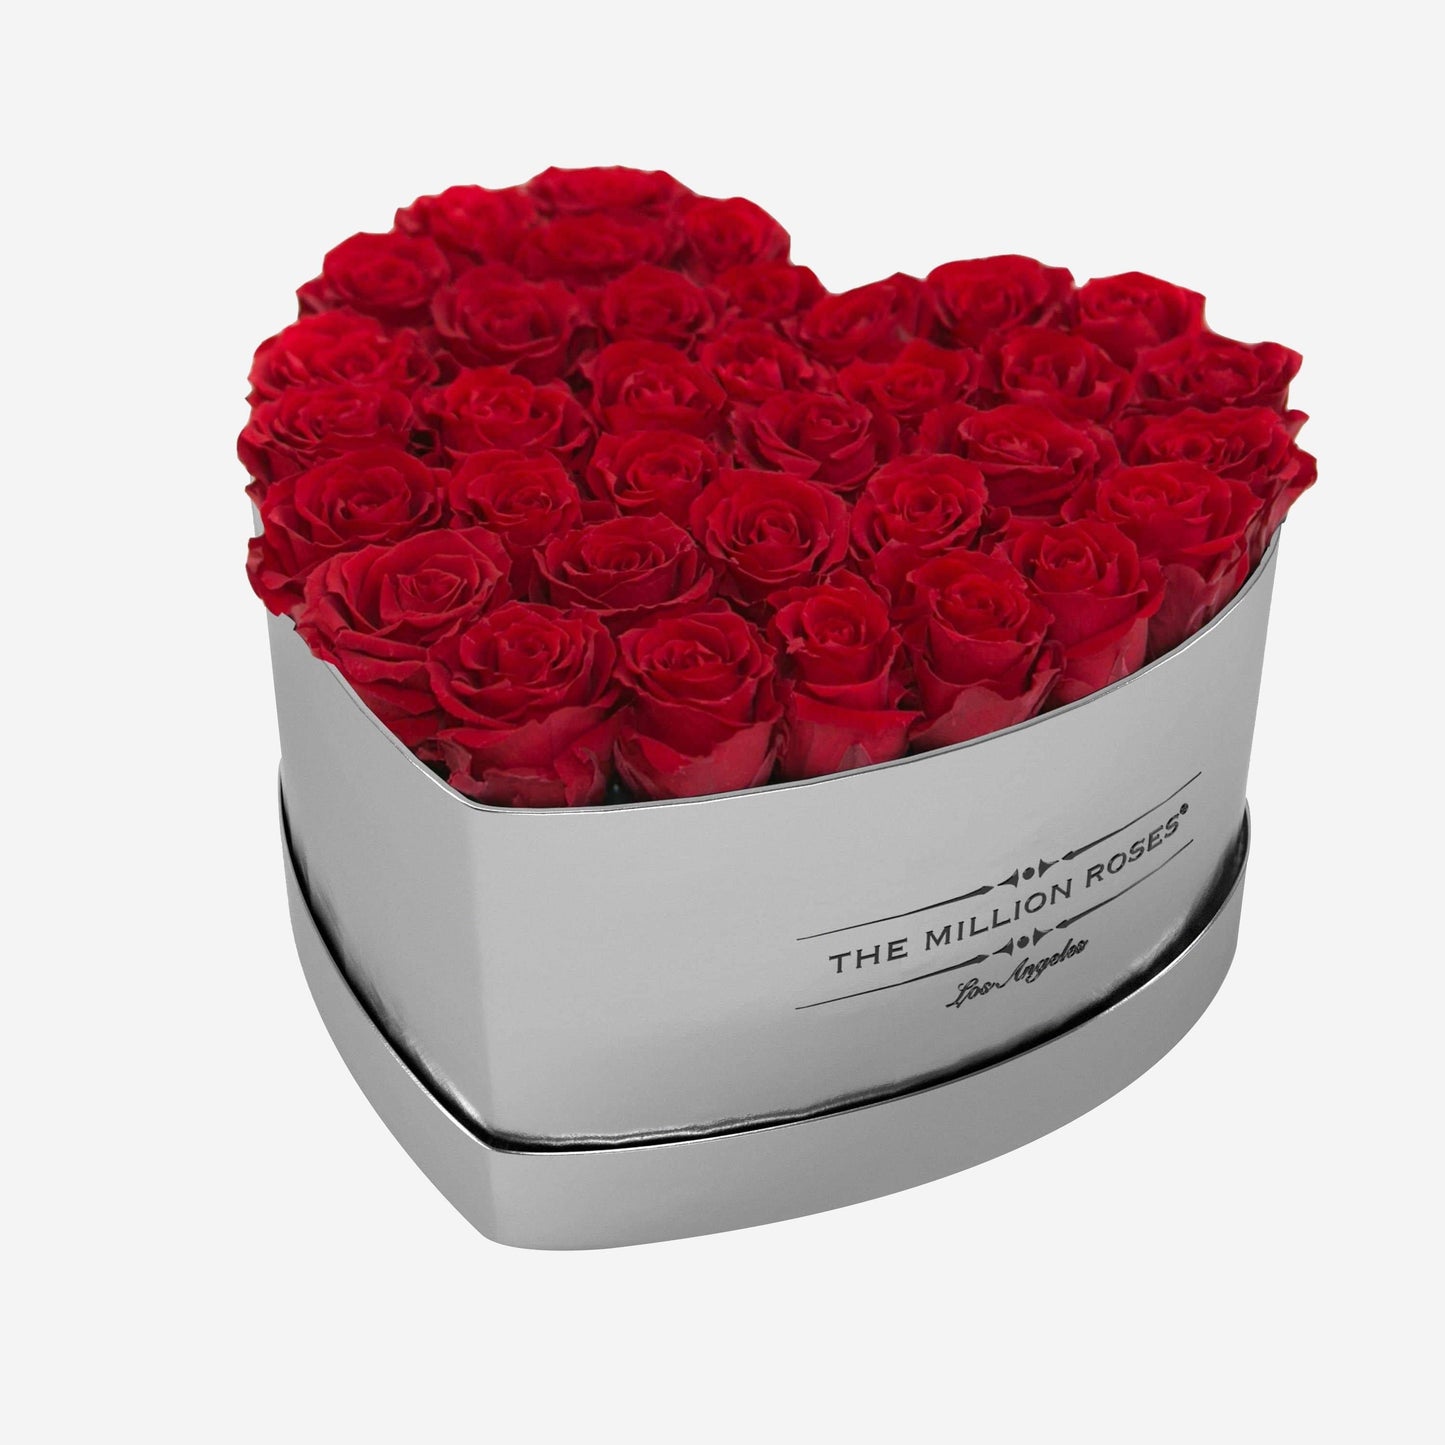 Heart Mirror Silver Box | Red Roses - The Million Roses